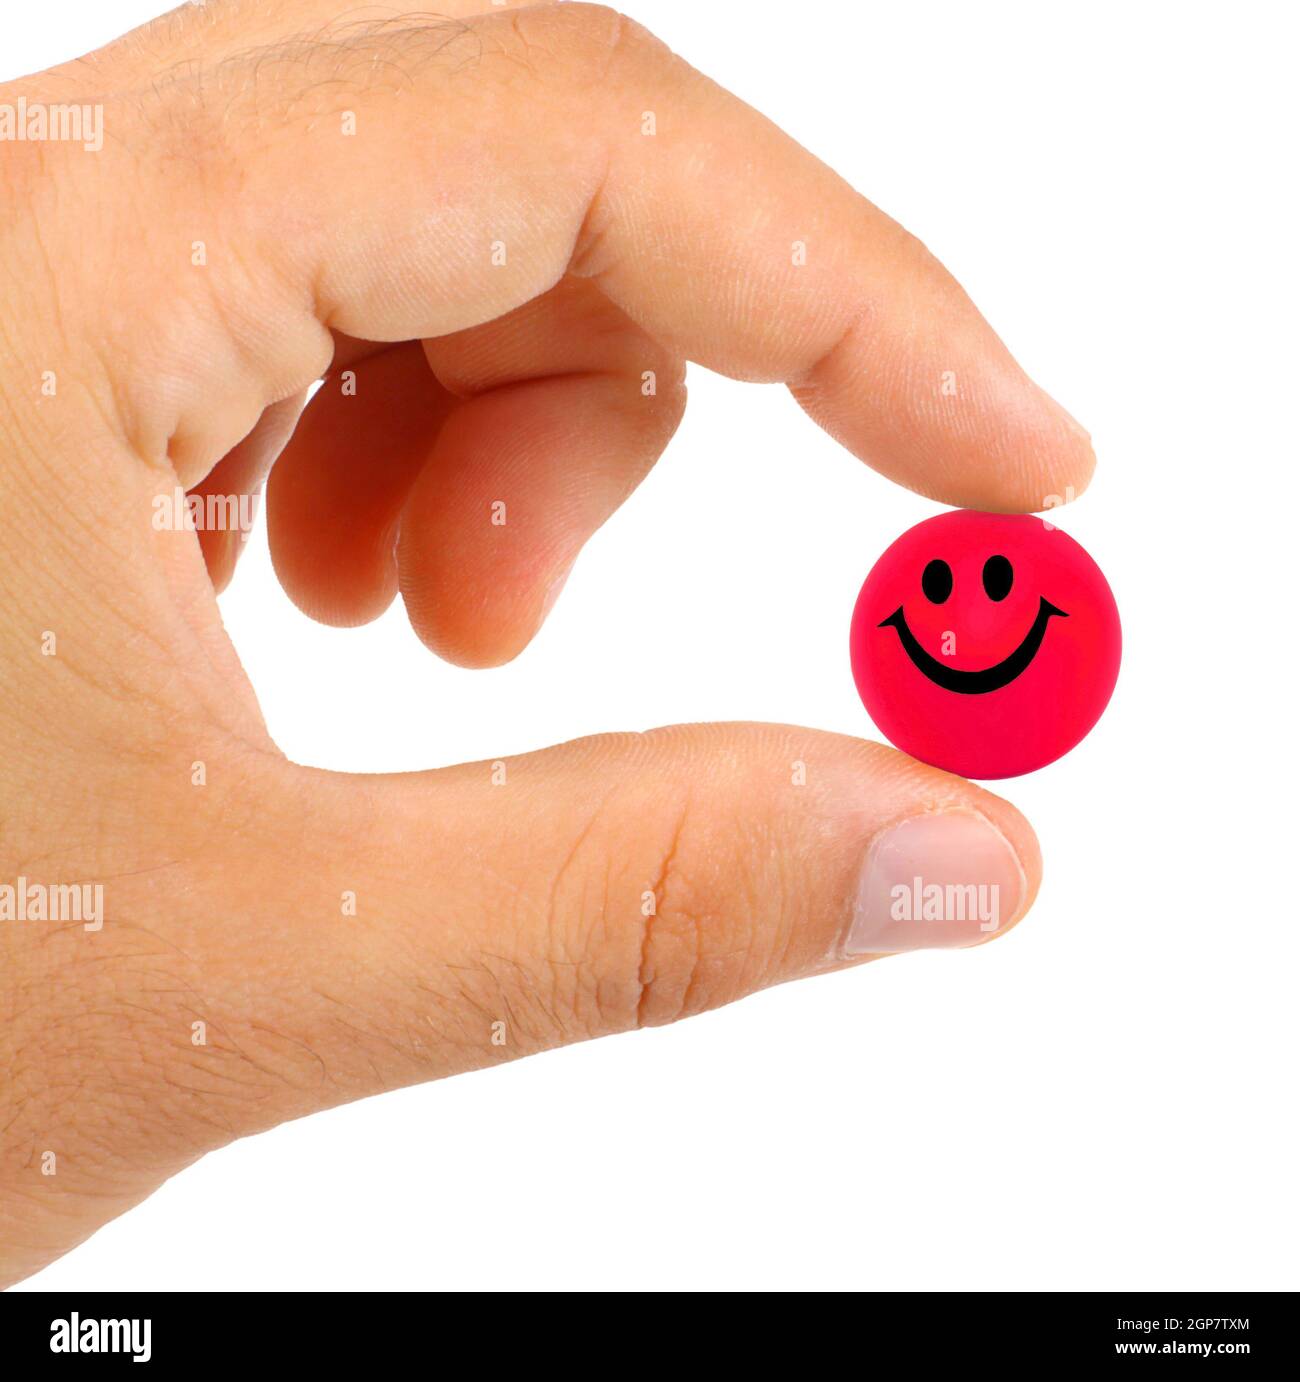 Ball with smile between the fingers on white background Stock Photo